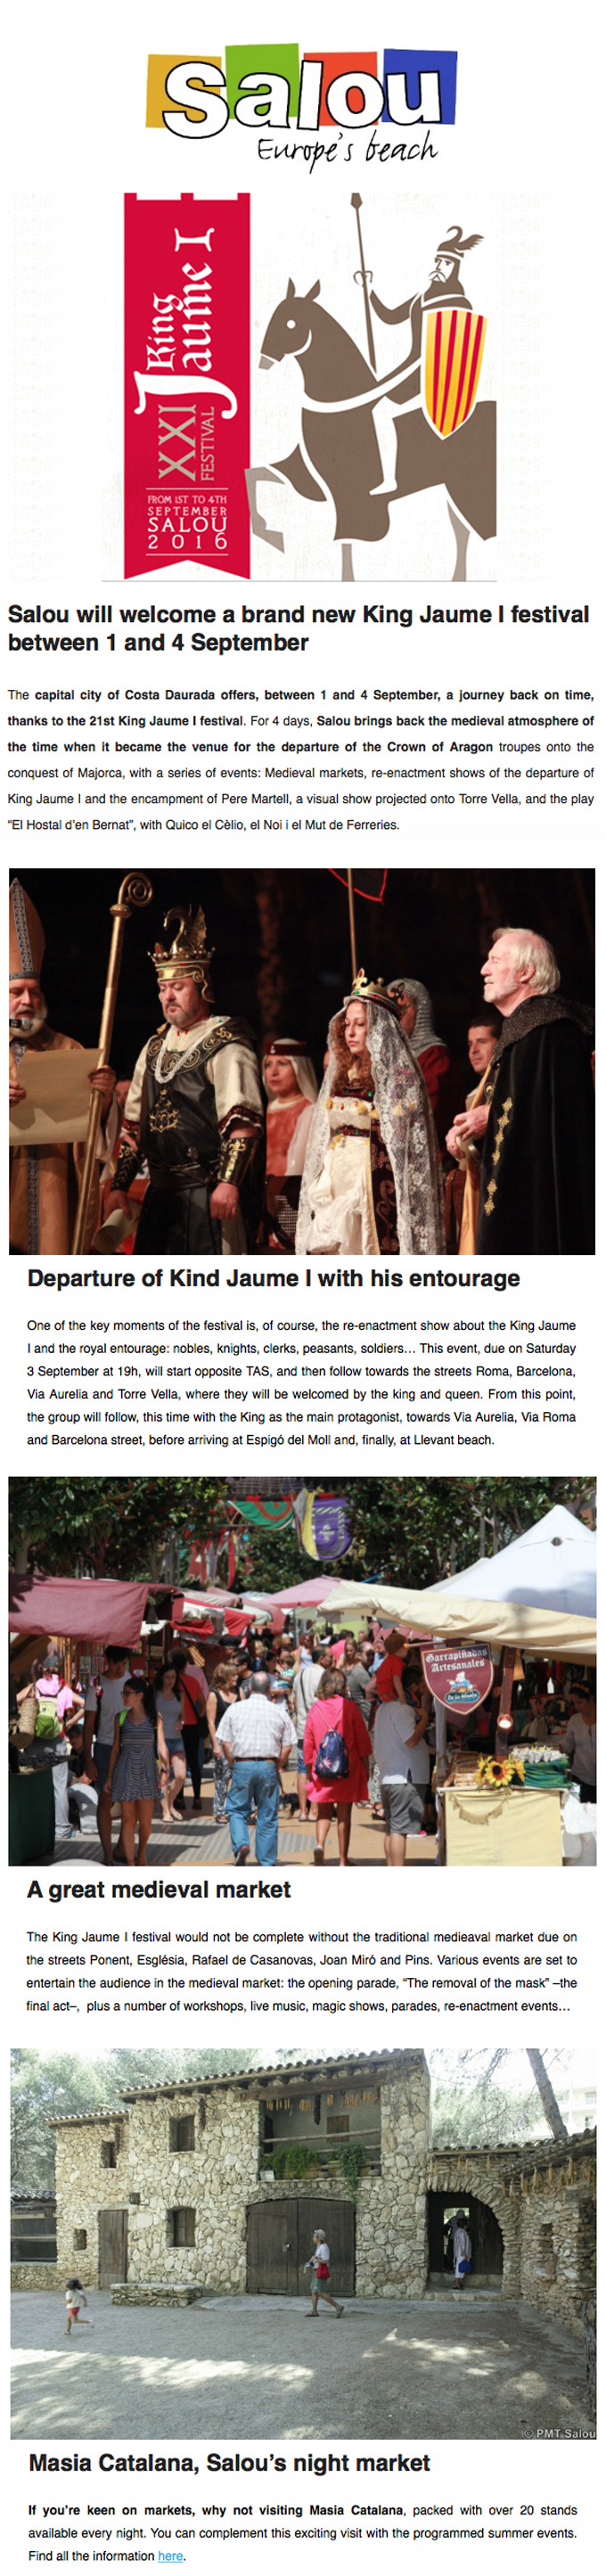 Salou will welcome a brand new King Jaume I festival between 1 and 4 September